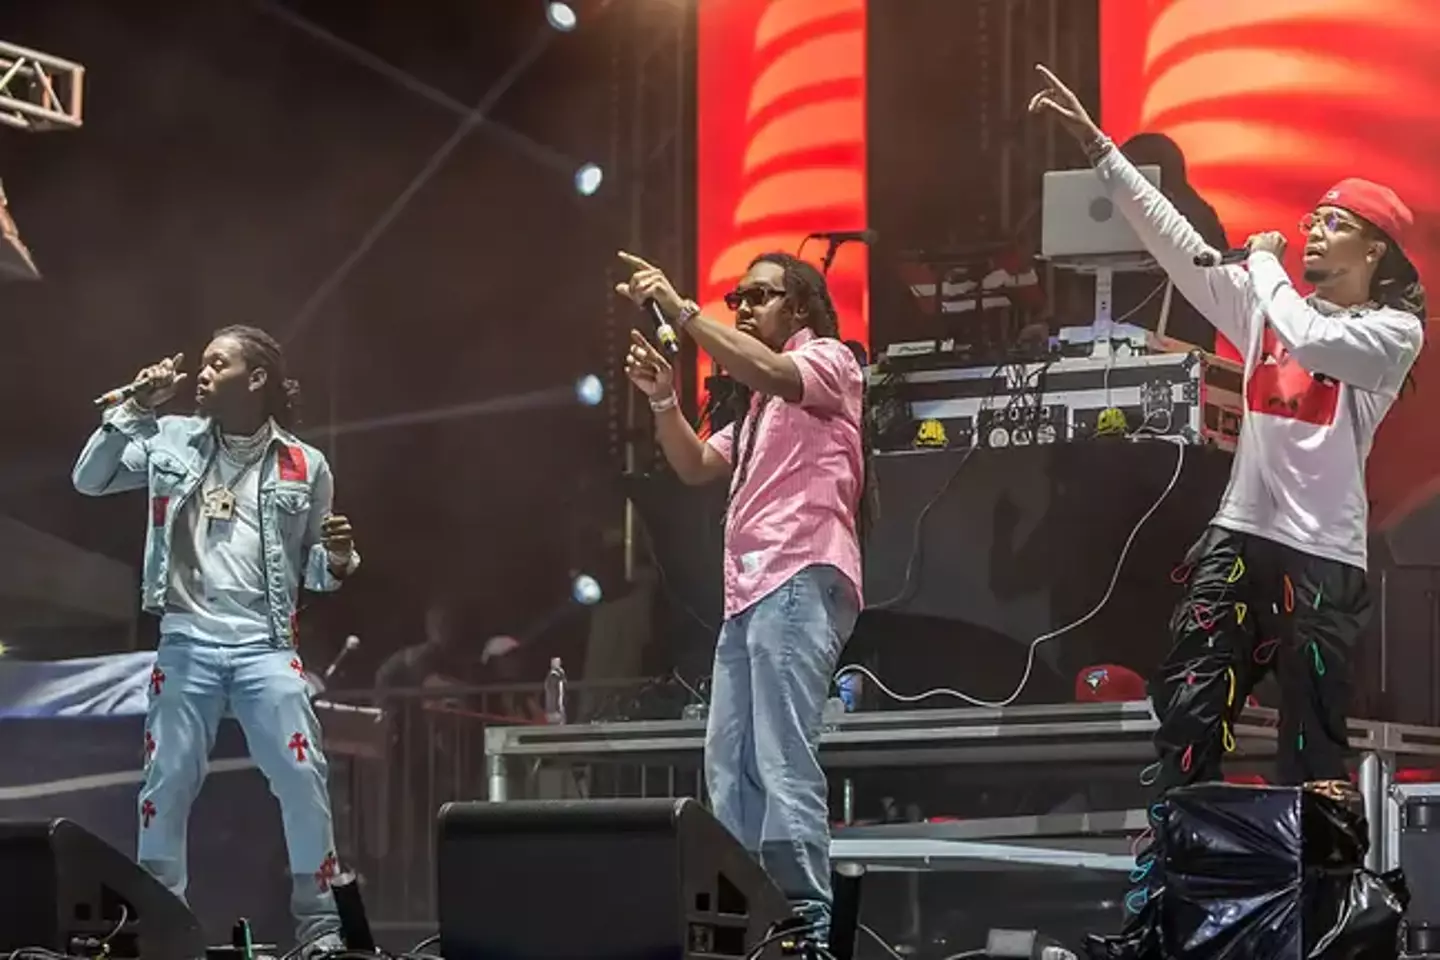 Takeoff (centre) performed alongside his family members as part of group Migos.